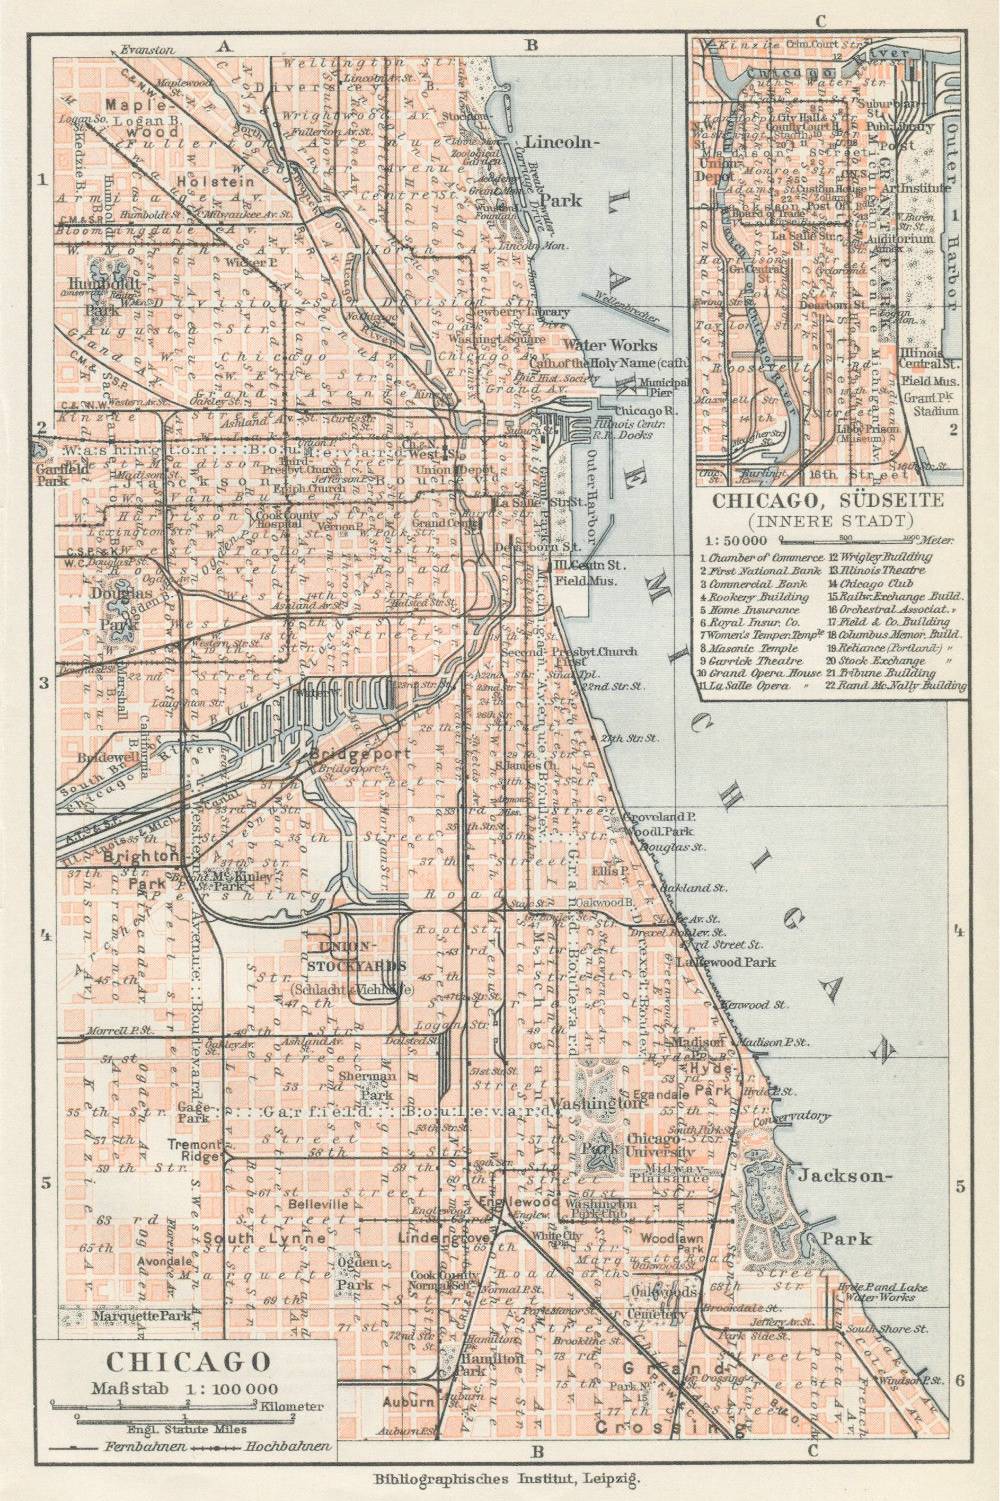 MAP - CHICAGO - MADE IN GERMANY - 1890